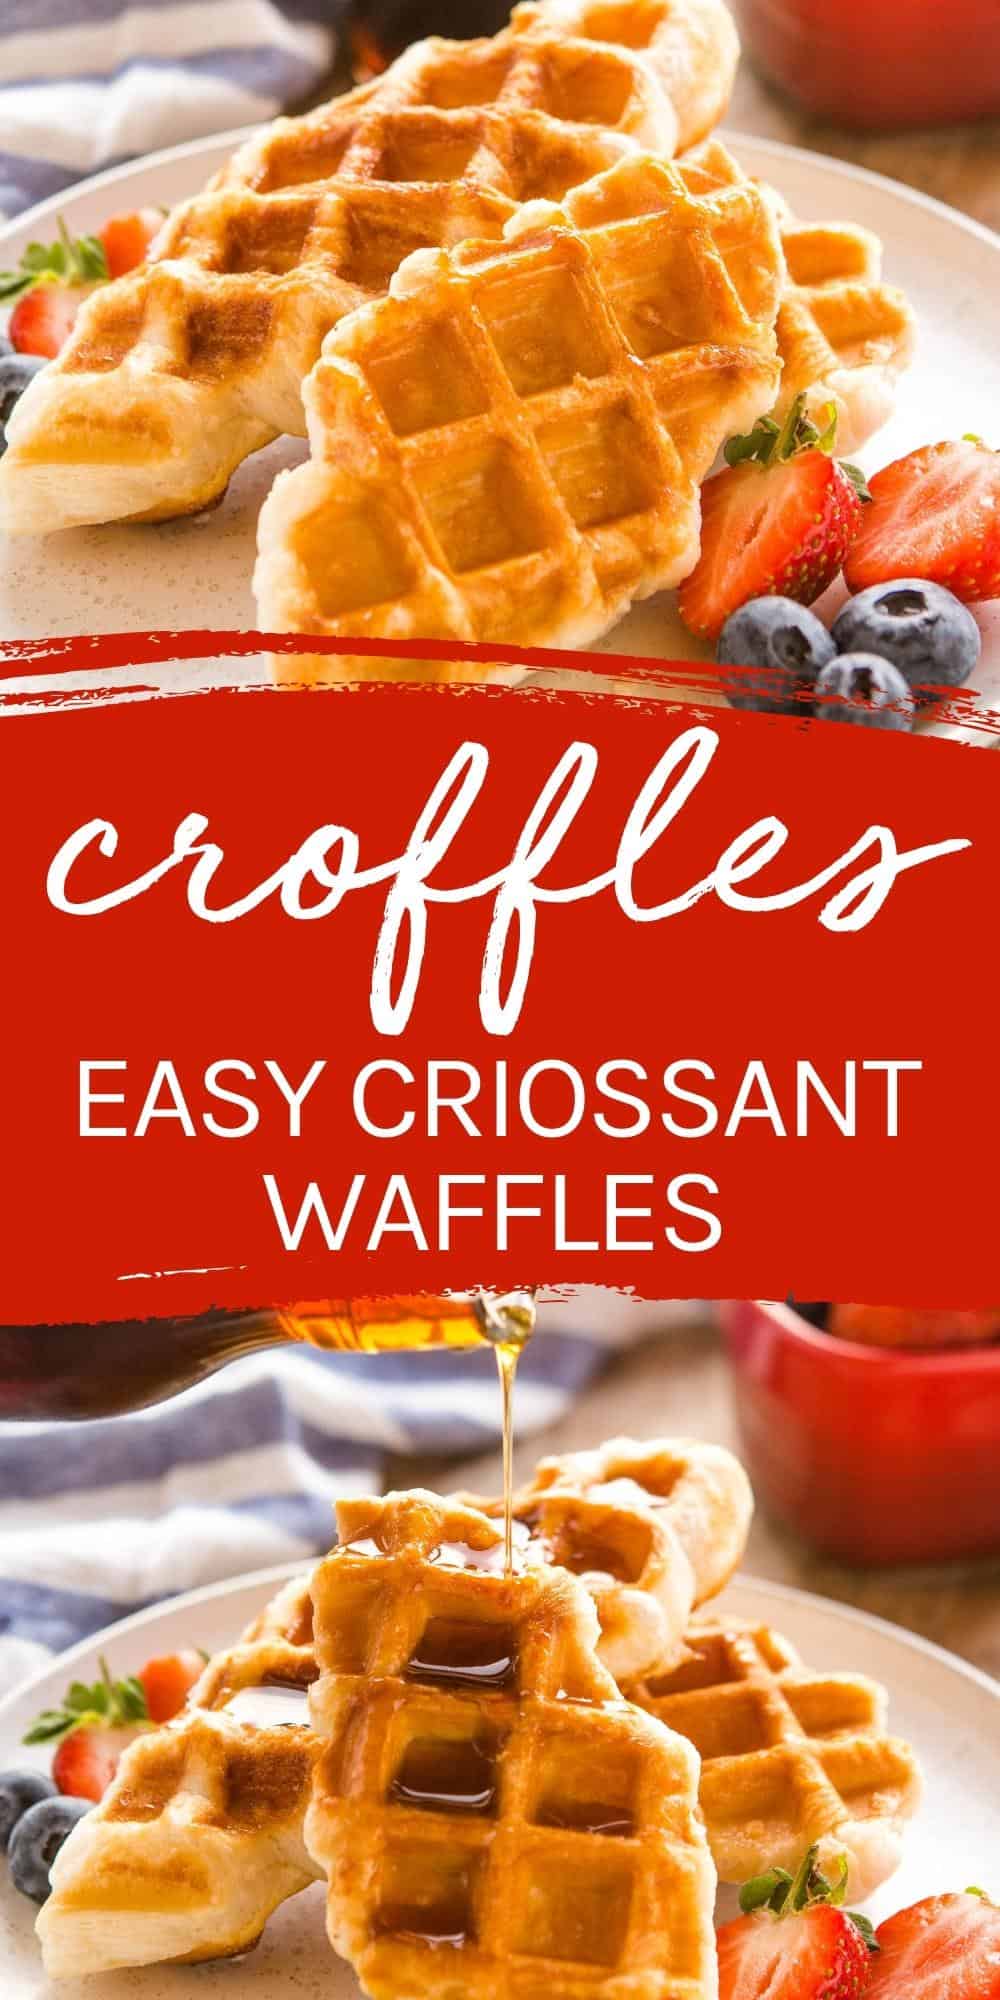 These easy Croffles are the perfect simply indulgent breakfast or dessert. Make them with frozen puff pastry dough or frozen unbaked croissants and serve with your favourite sweet or savory toppings! Recipe from thebusybaker.ca! #croffles #criossantwaffles #breakfast #brunch #holidaybreakfast #holiday #easybreakfast #waffles via @busybakerblog